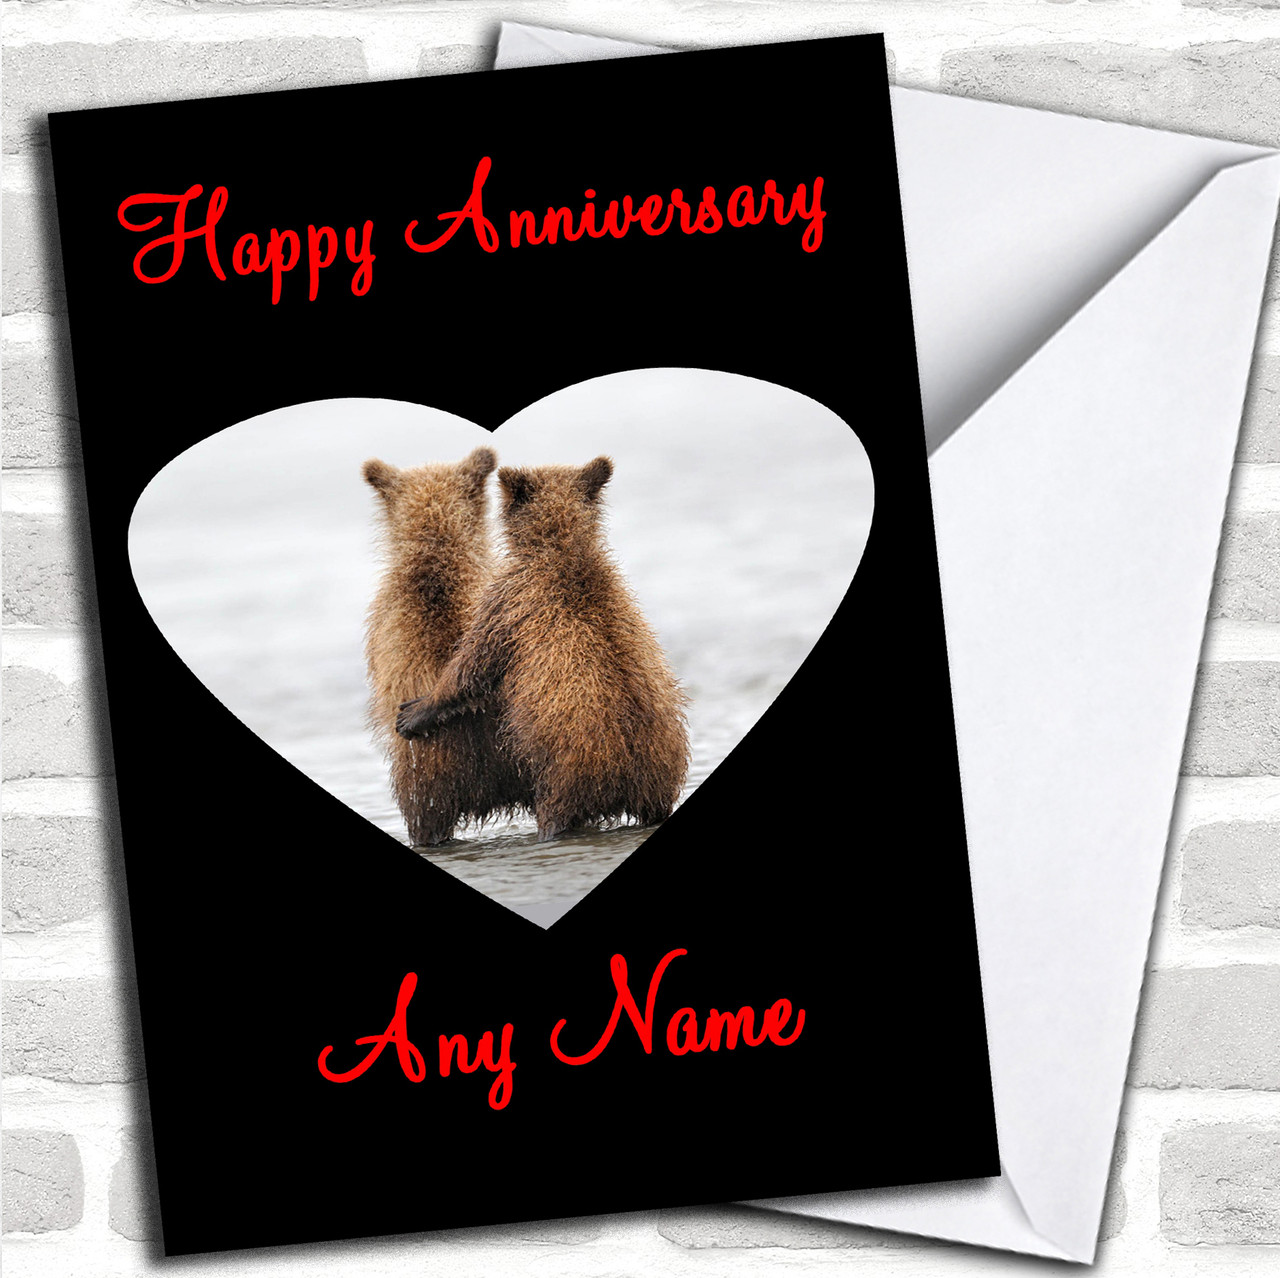 Cuddling Bears Personalized Anniversary Card Red Heart Print